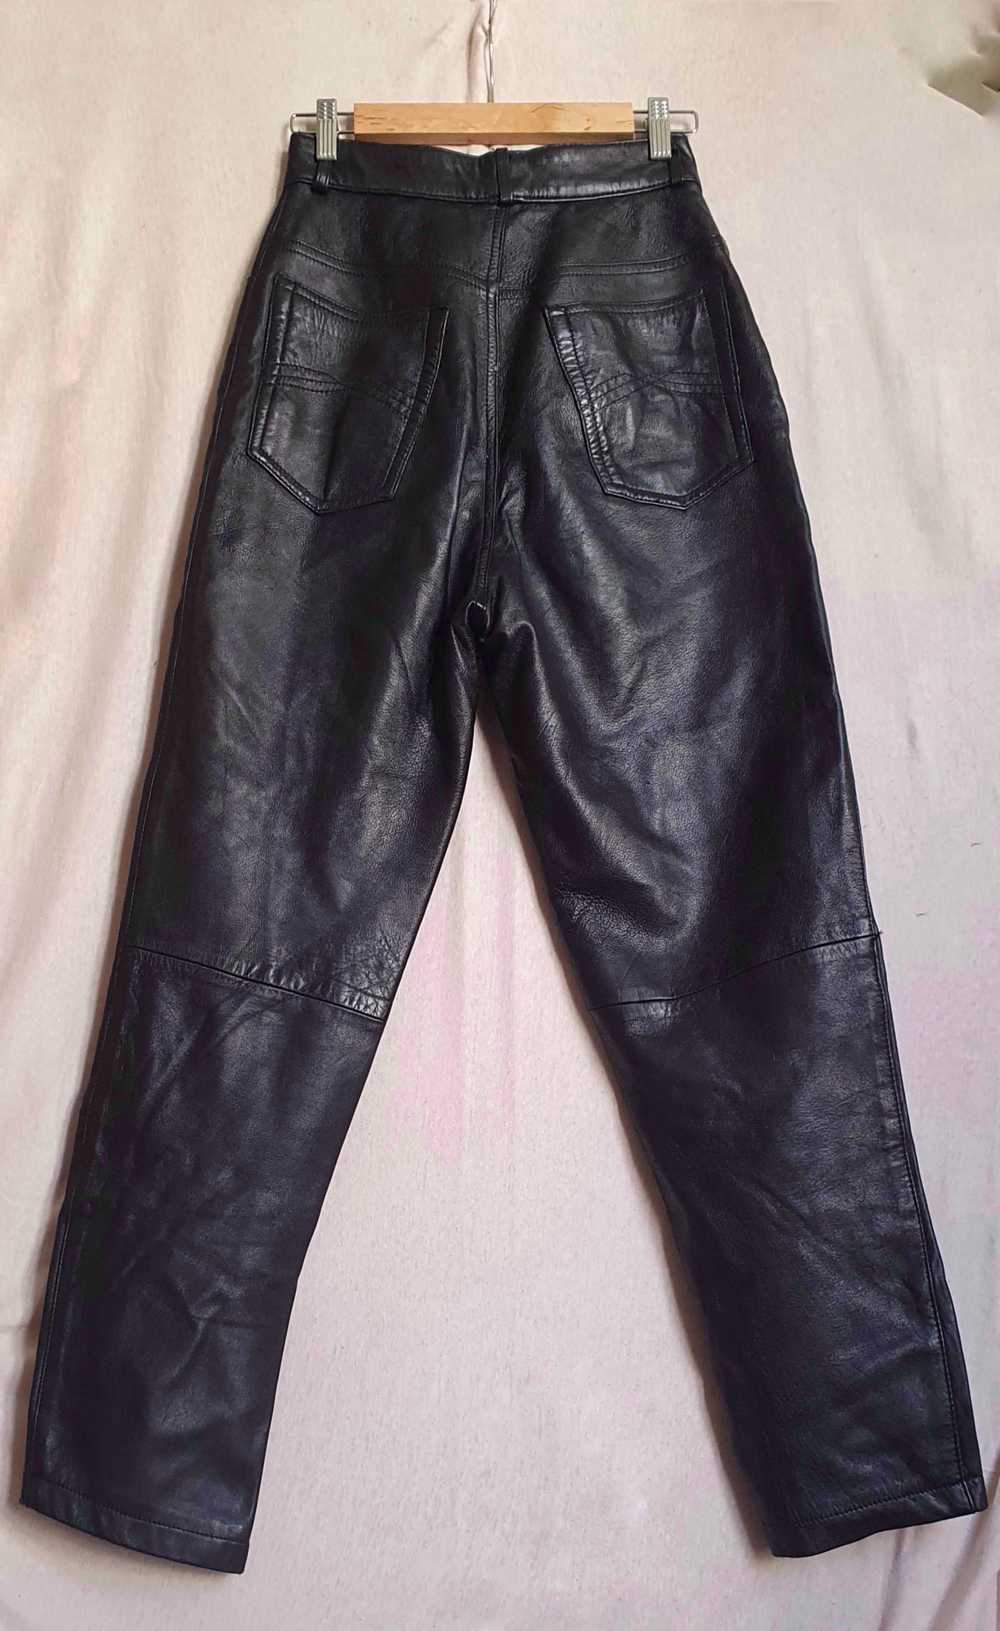 Leather trousers - High-waisted leather pants, &q… - image 3